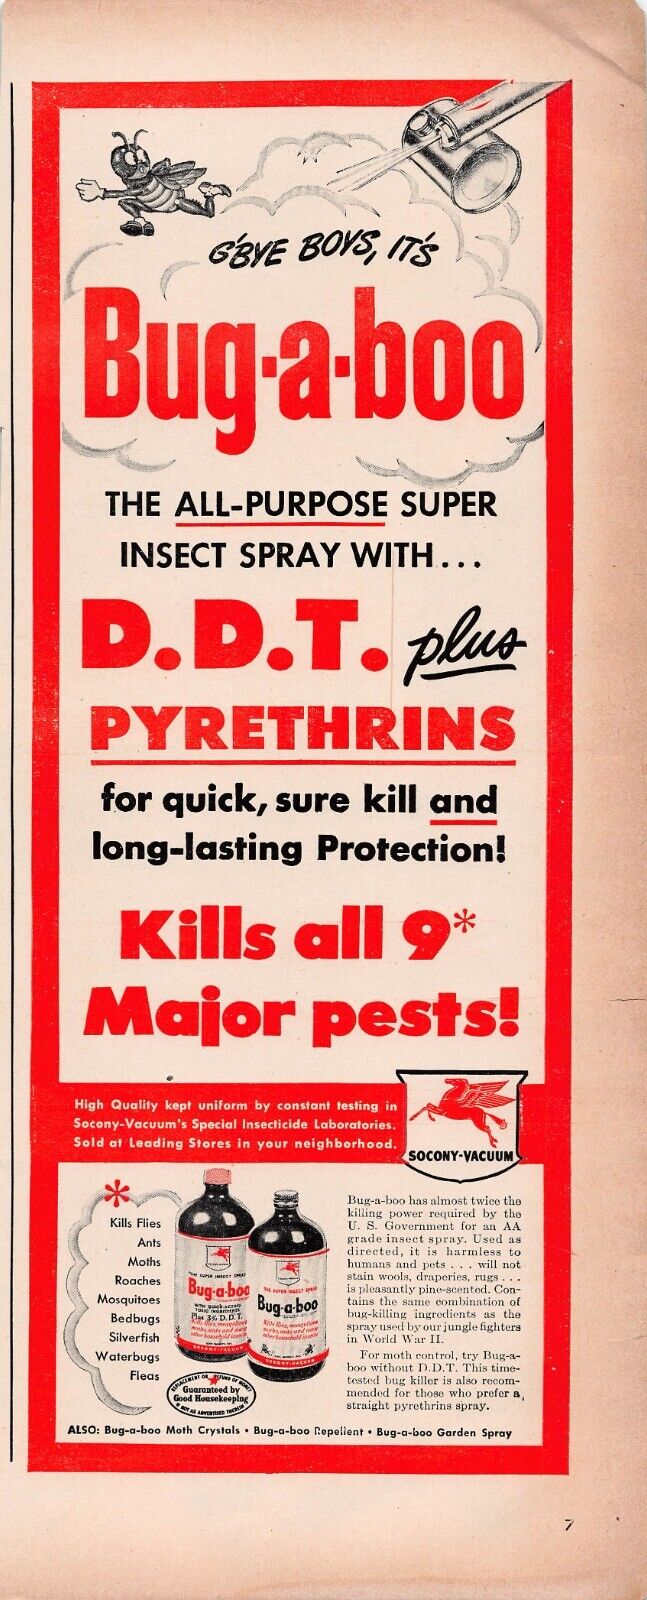 Bugaboo Insecticide Pesticide DDT Banned 1970s Mobil Oil Made Vtg Print Ad 1947